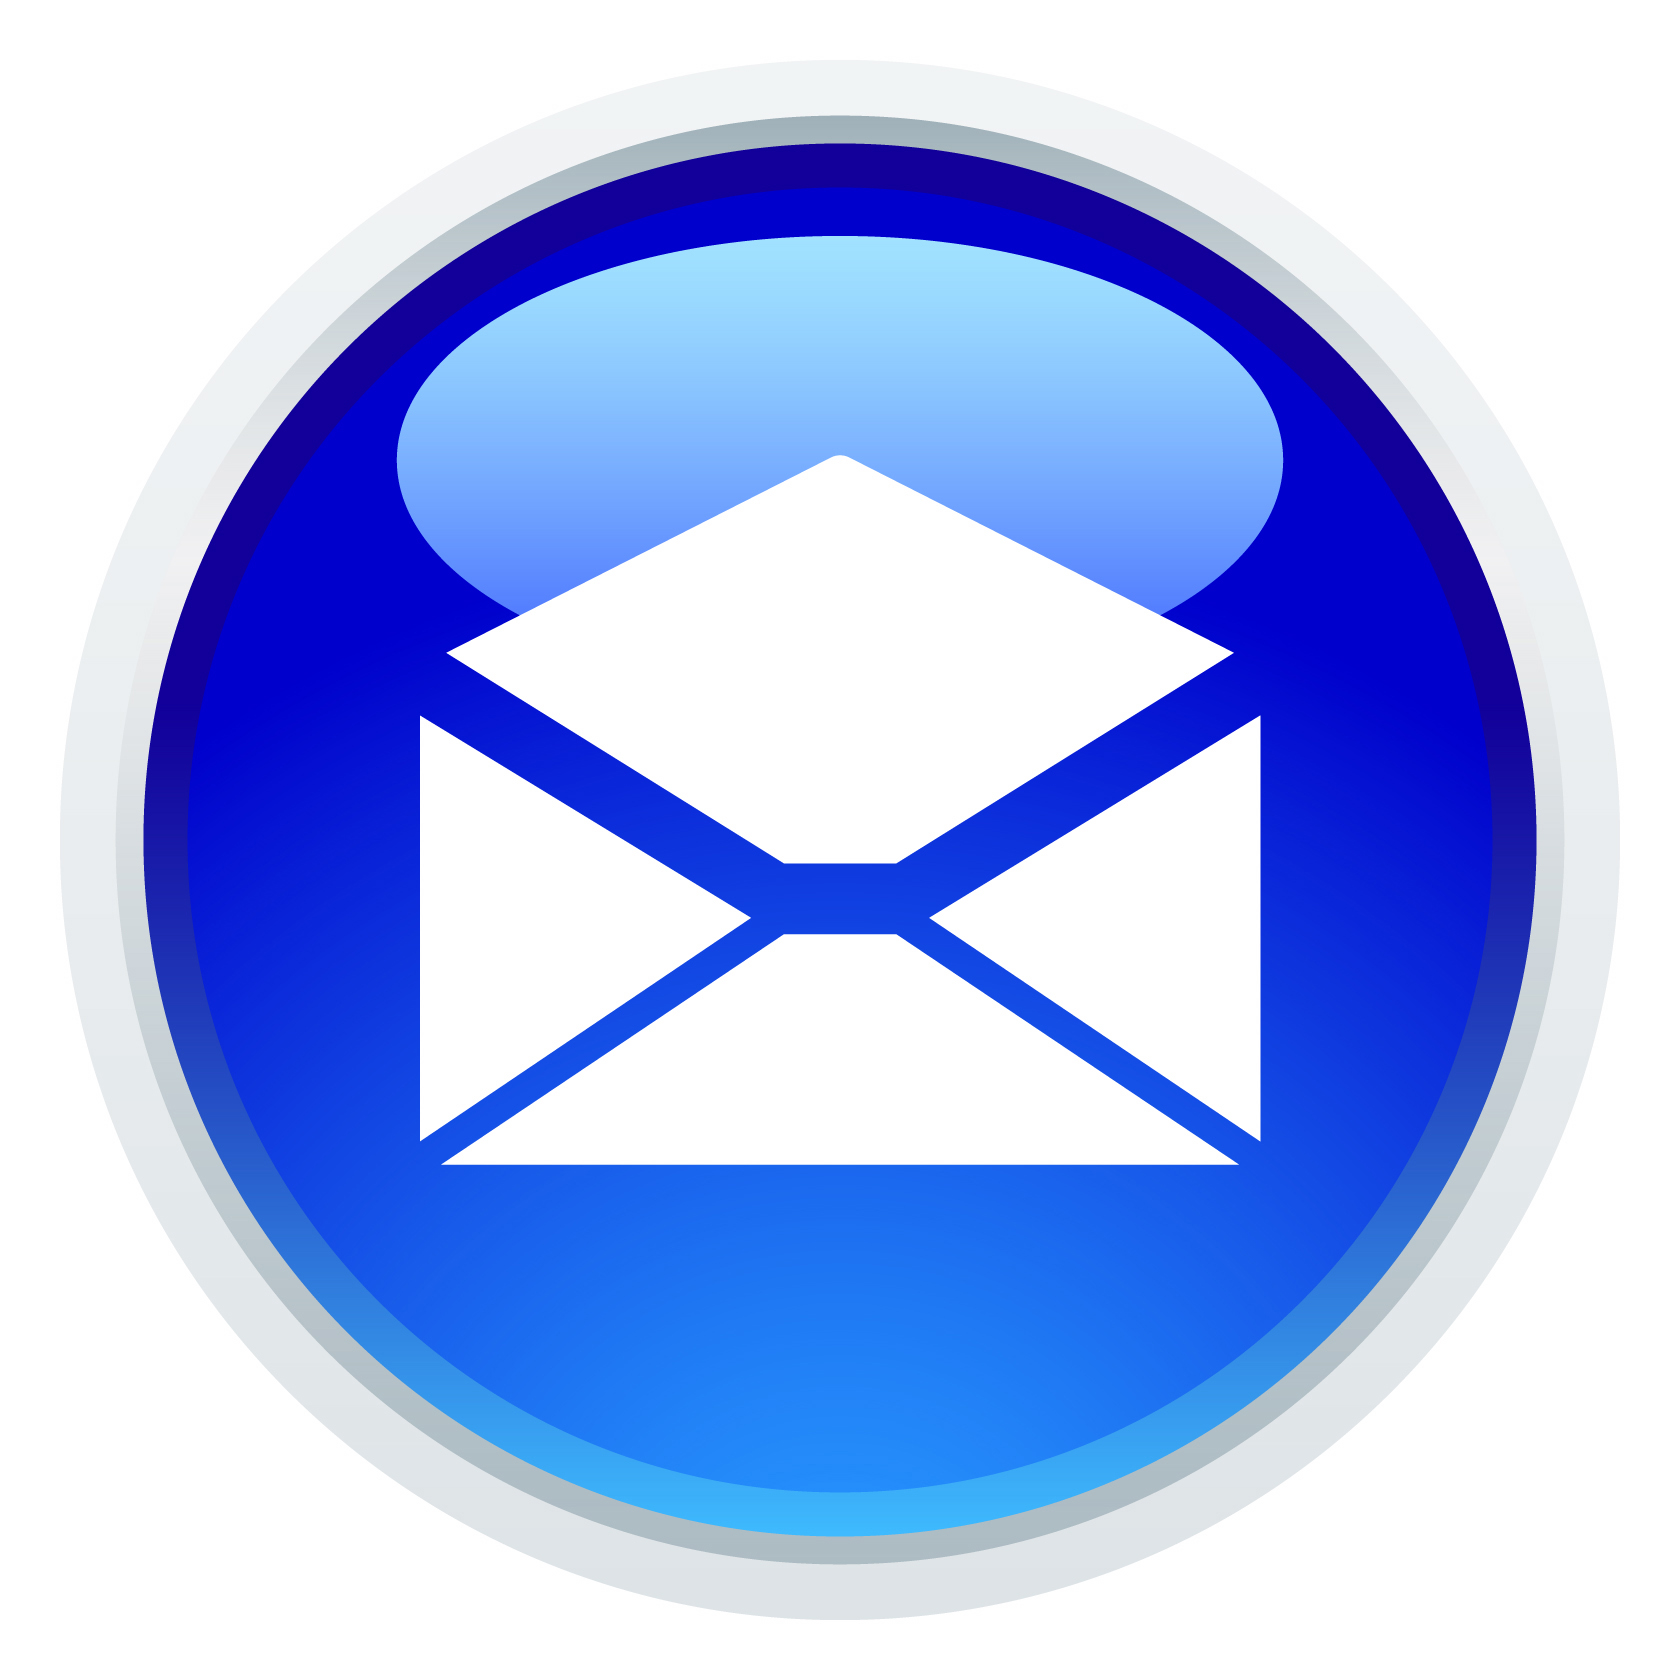 email clipart blue - photo #34